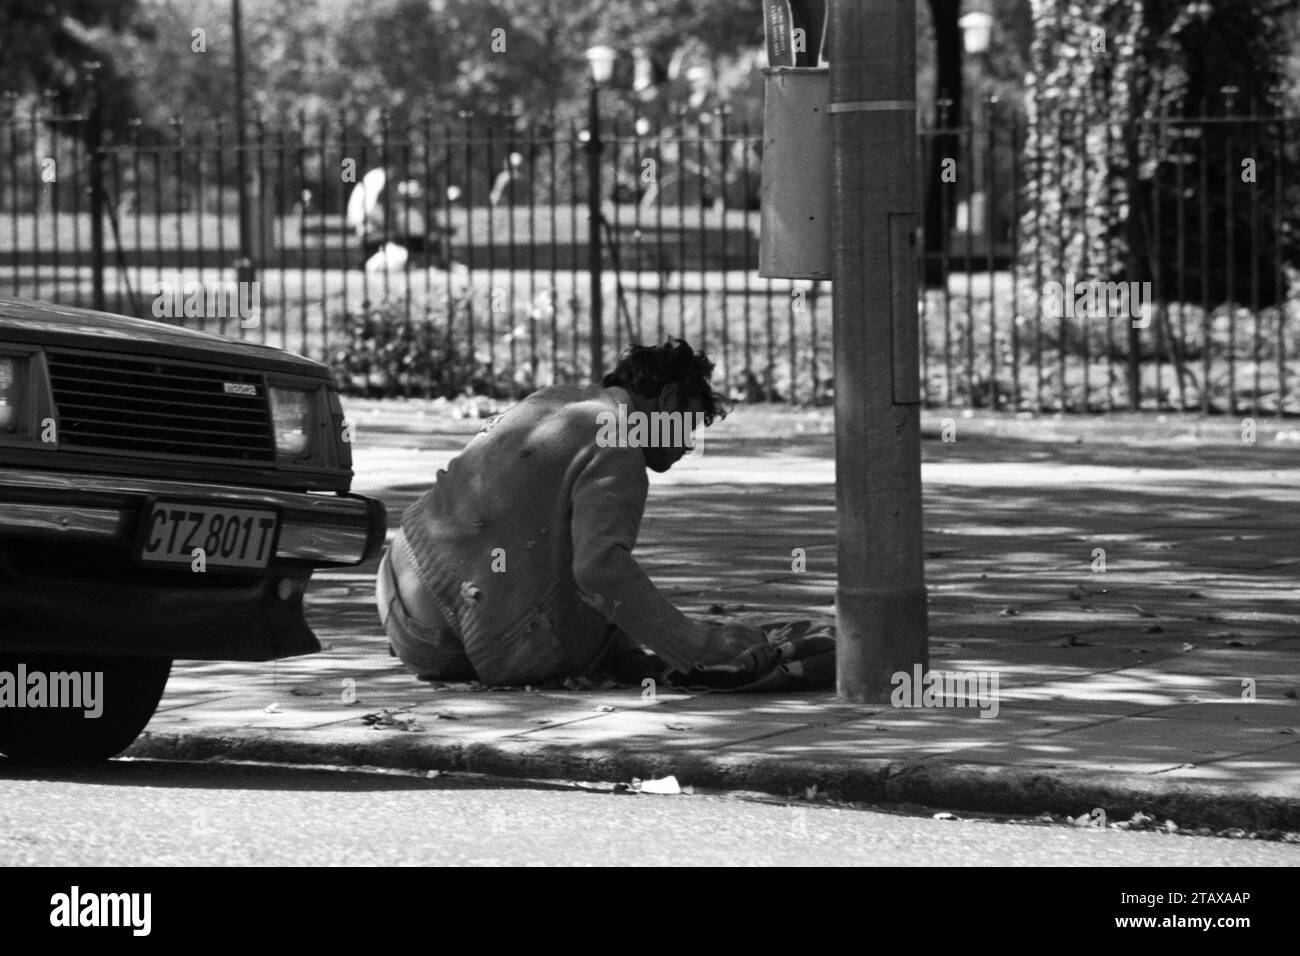 Collapsed man drunk and in poverty, Johannesburg Gauteng, South Africa, 1985.  From the collection - South Africa 1980s - Don Minnaar photographic archive Stock Photo